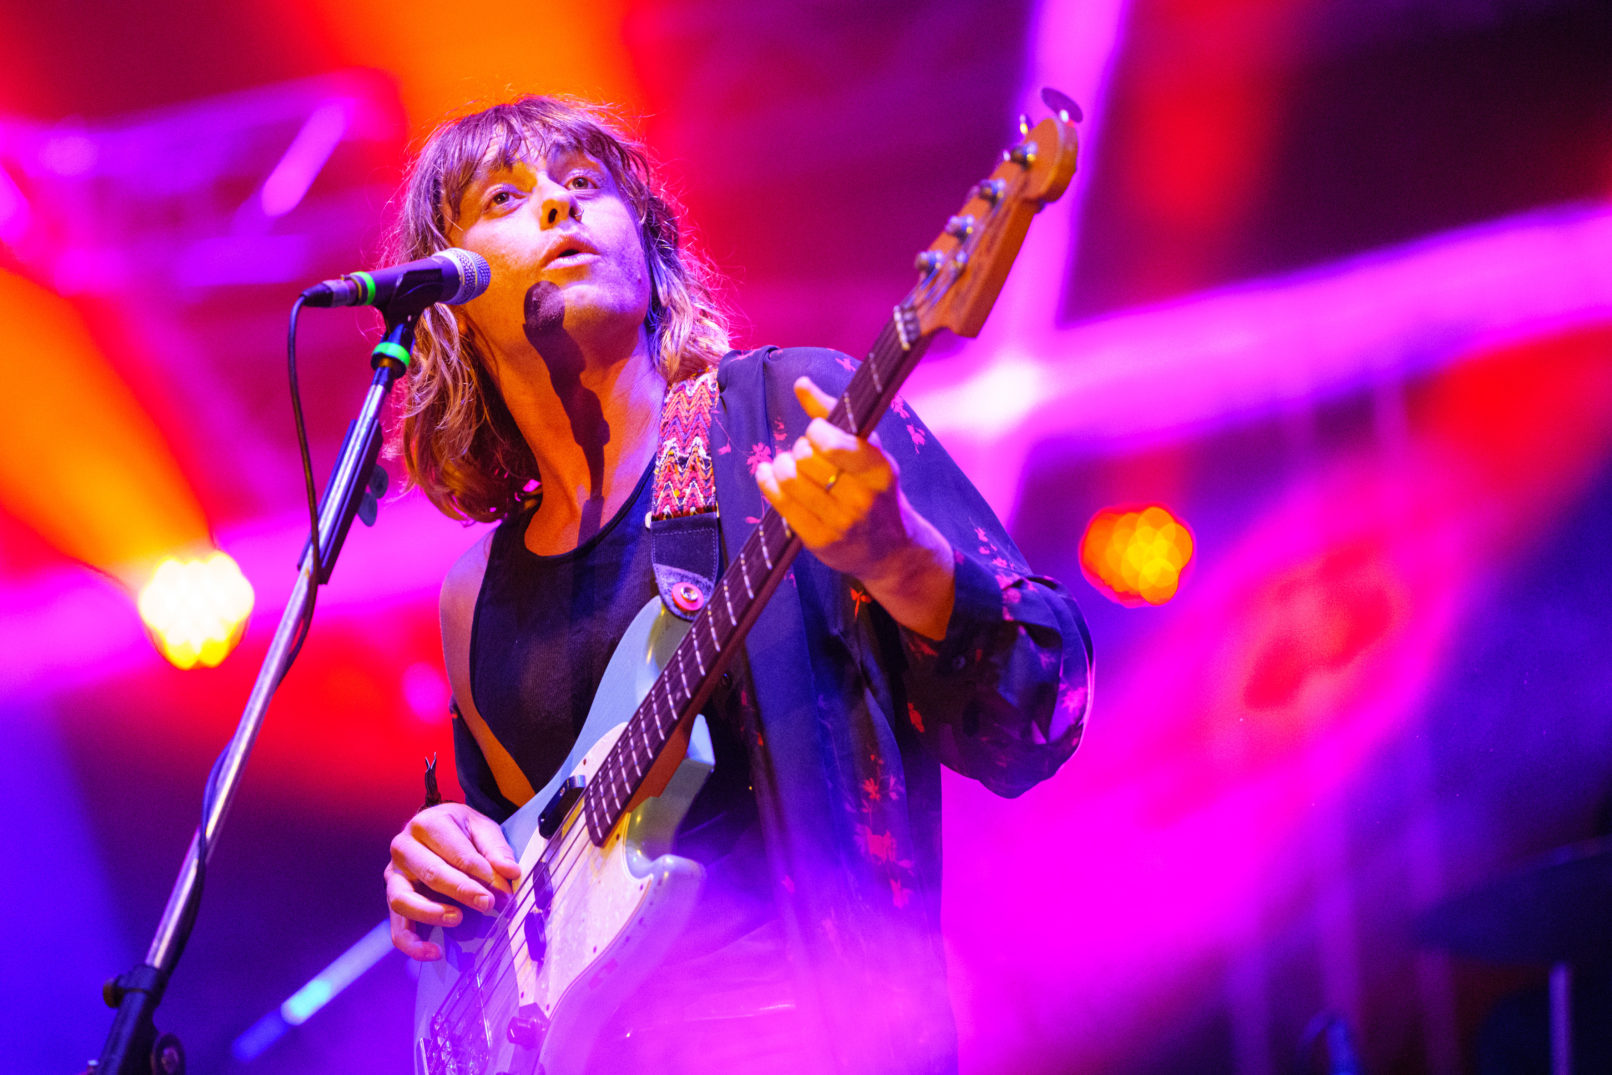 Lime Cordiale at Woodfod Folk Festival 2019